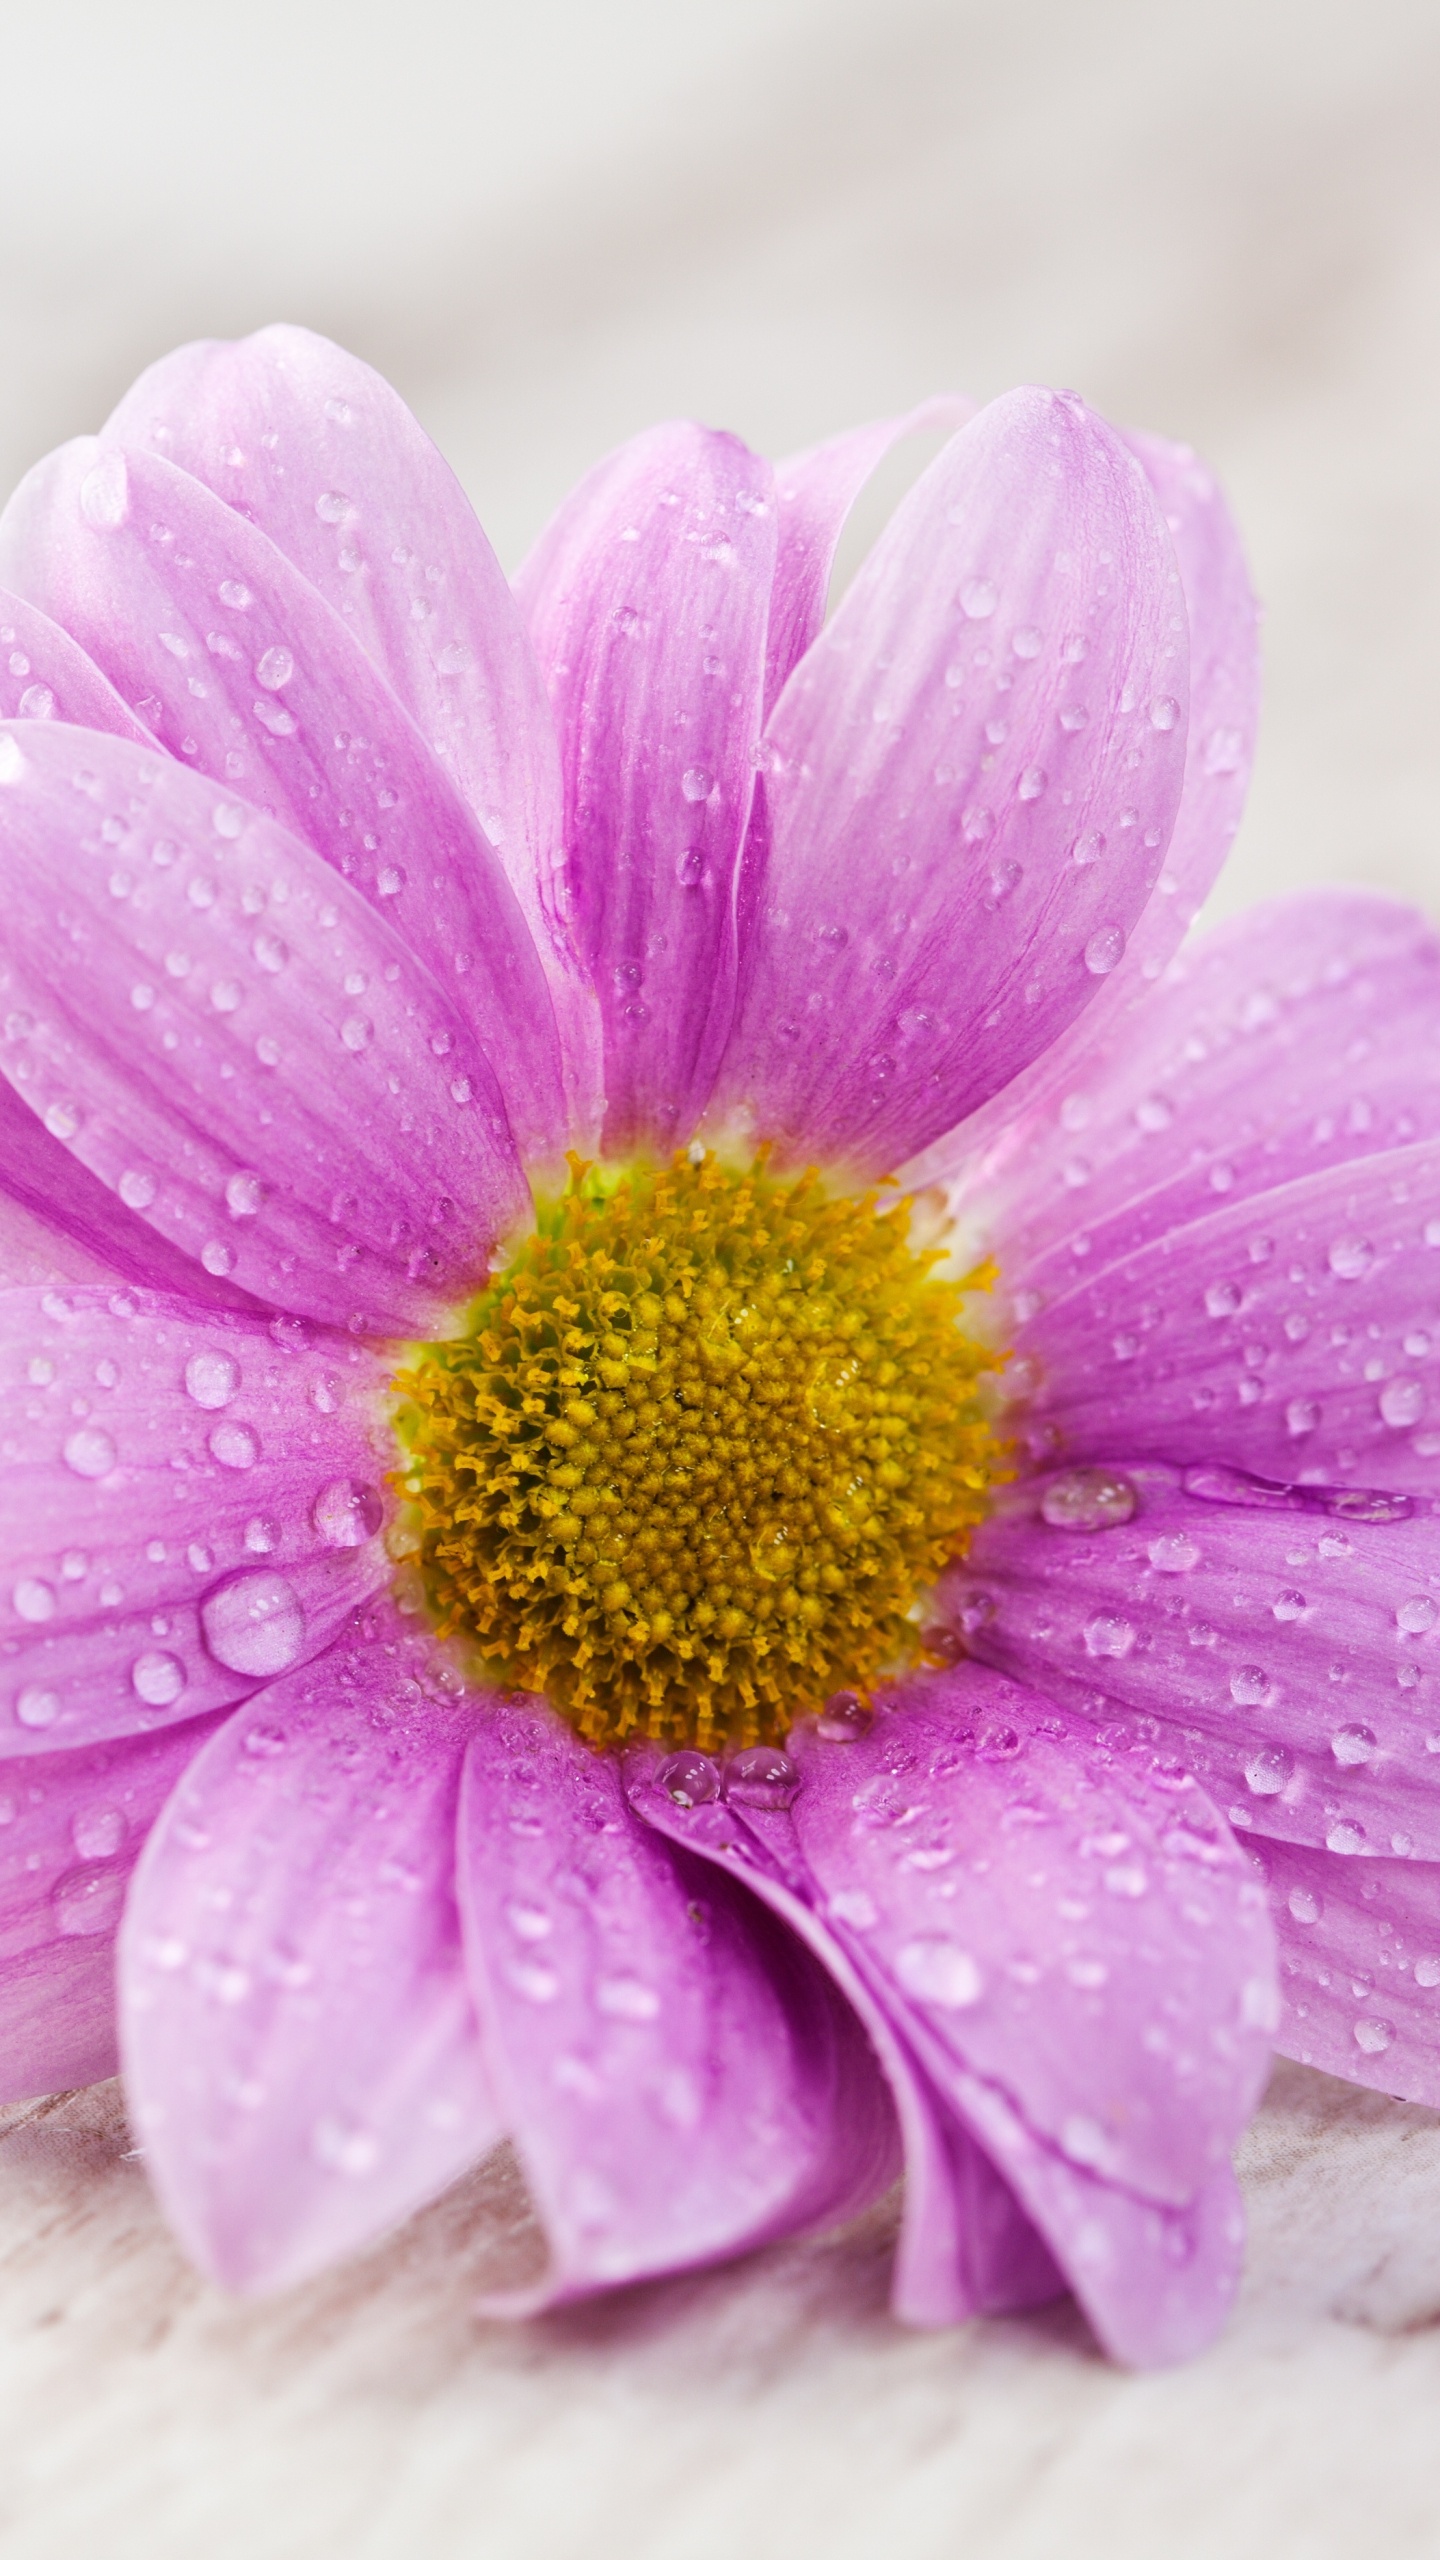 Pink Flower on White Surface. Wallpaper in 1440x2560 Resolution